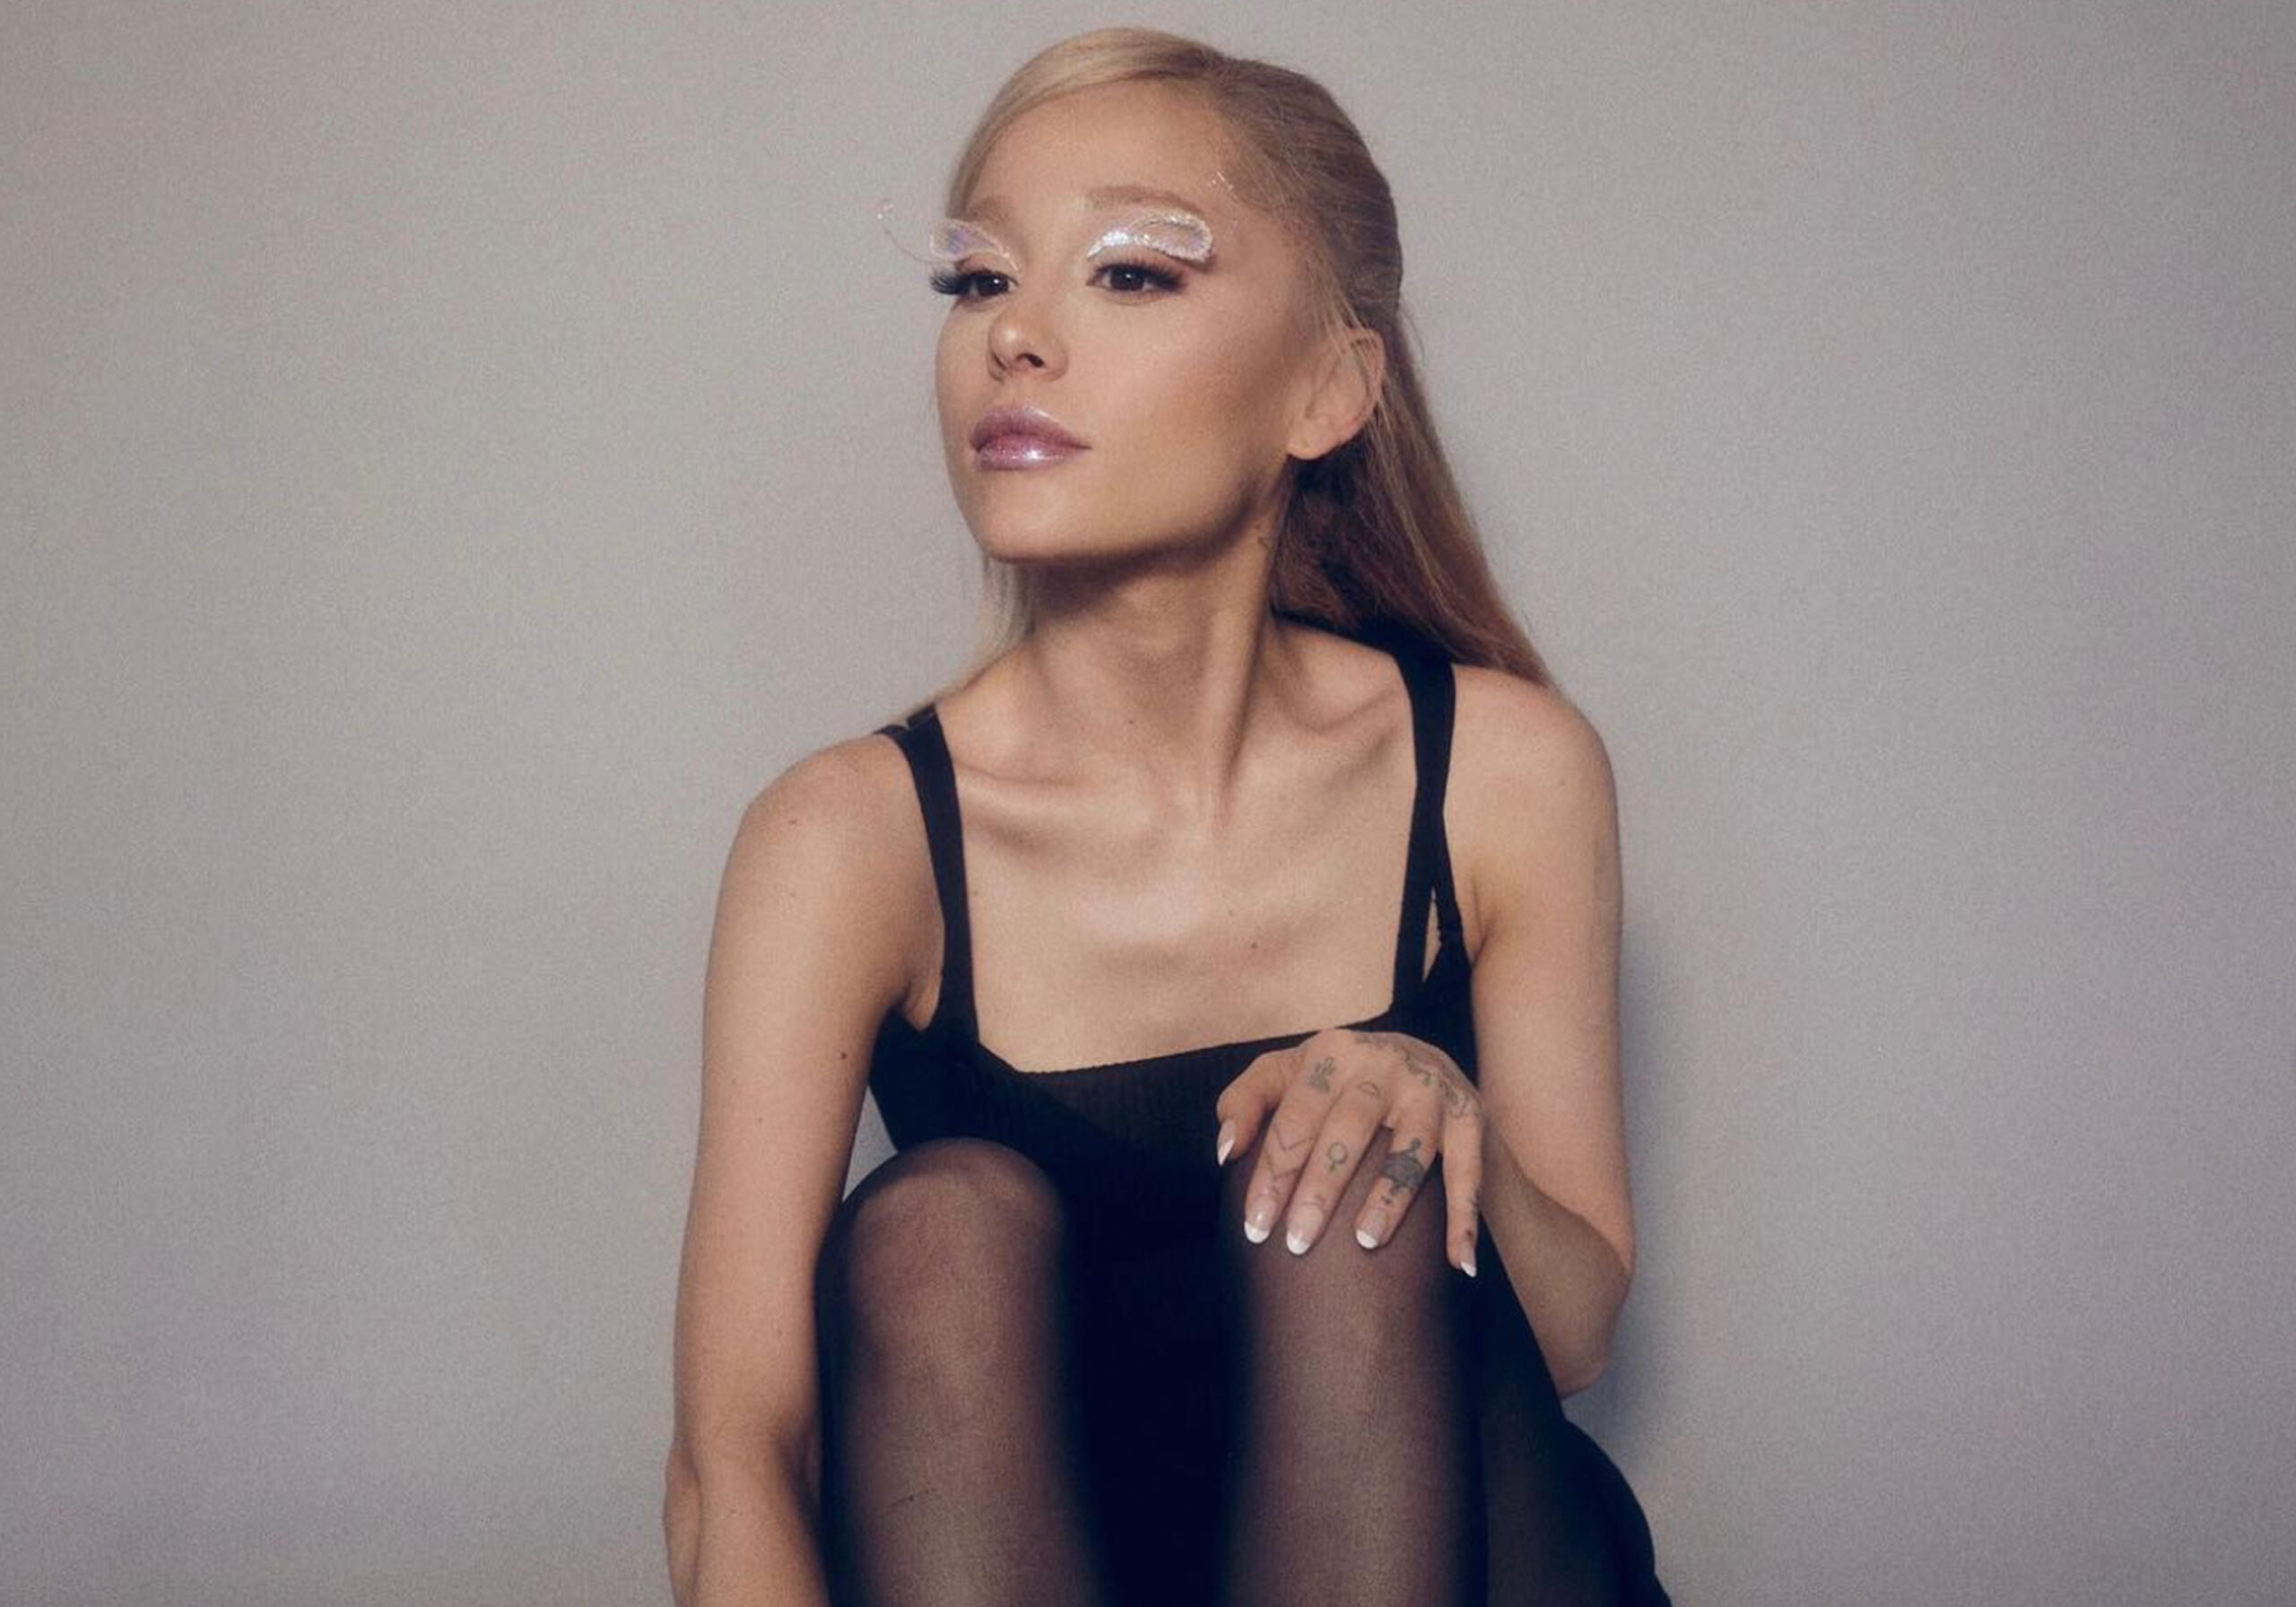 Ariana Grande Addresses Concerns Surrounding Her Weight